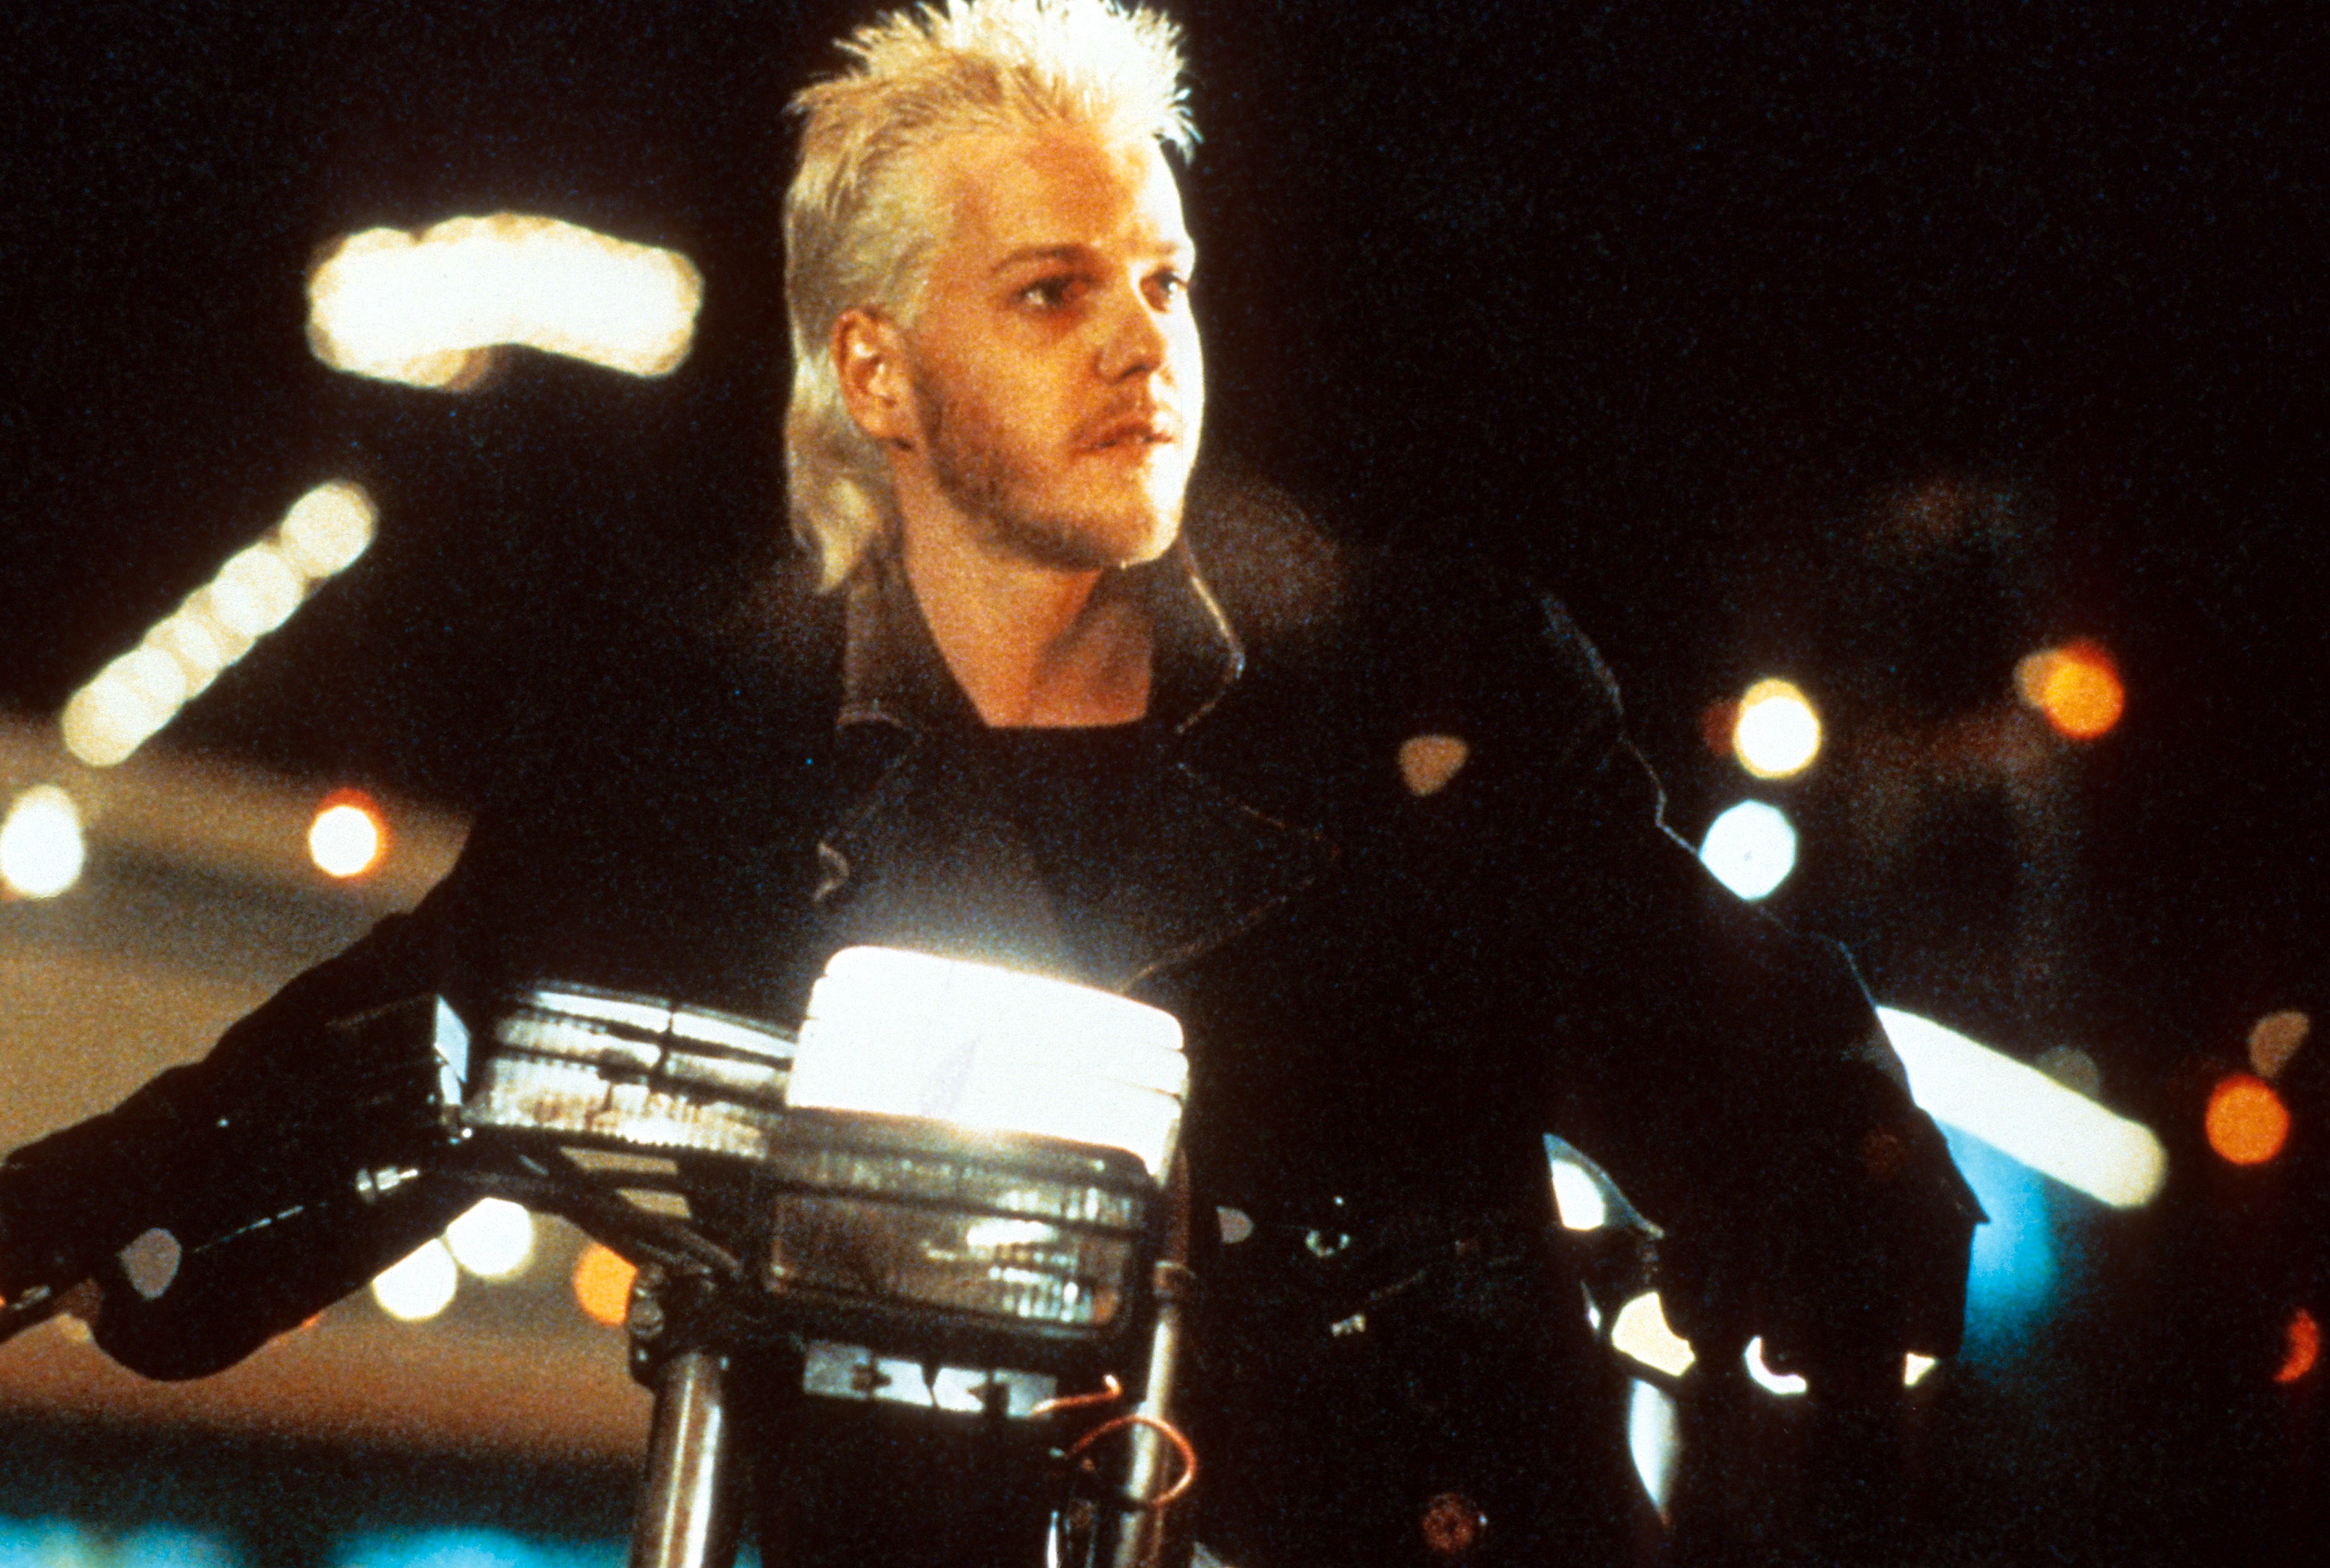 Kiefer Sutherland in 'The Lost Boys'